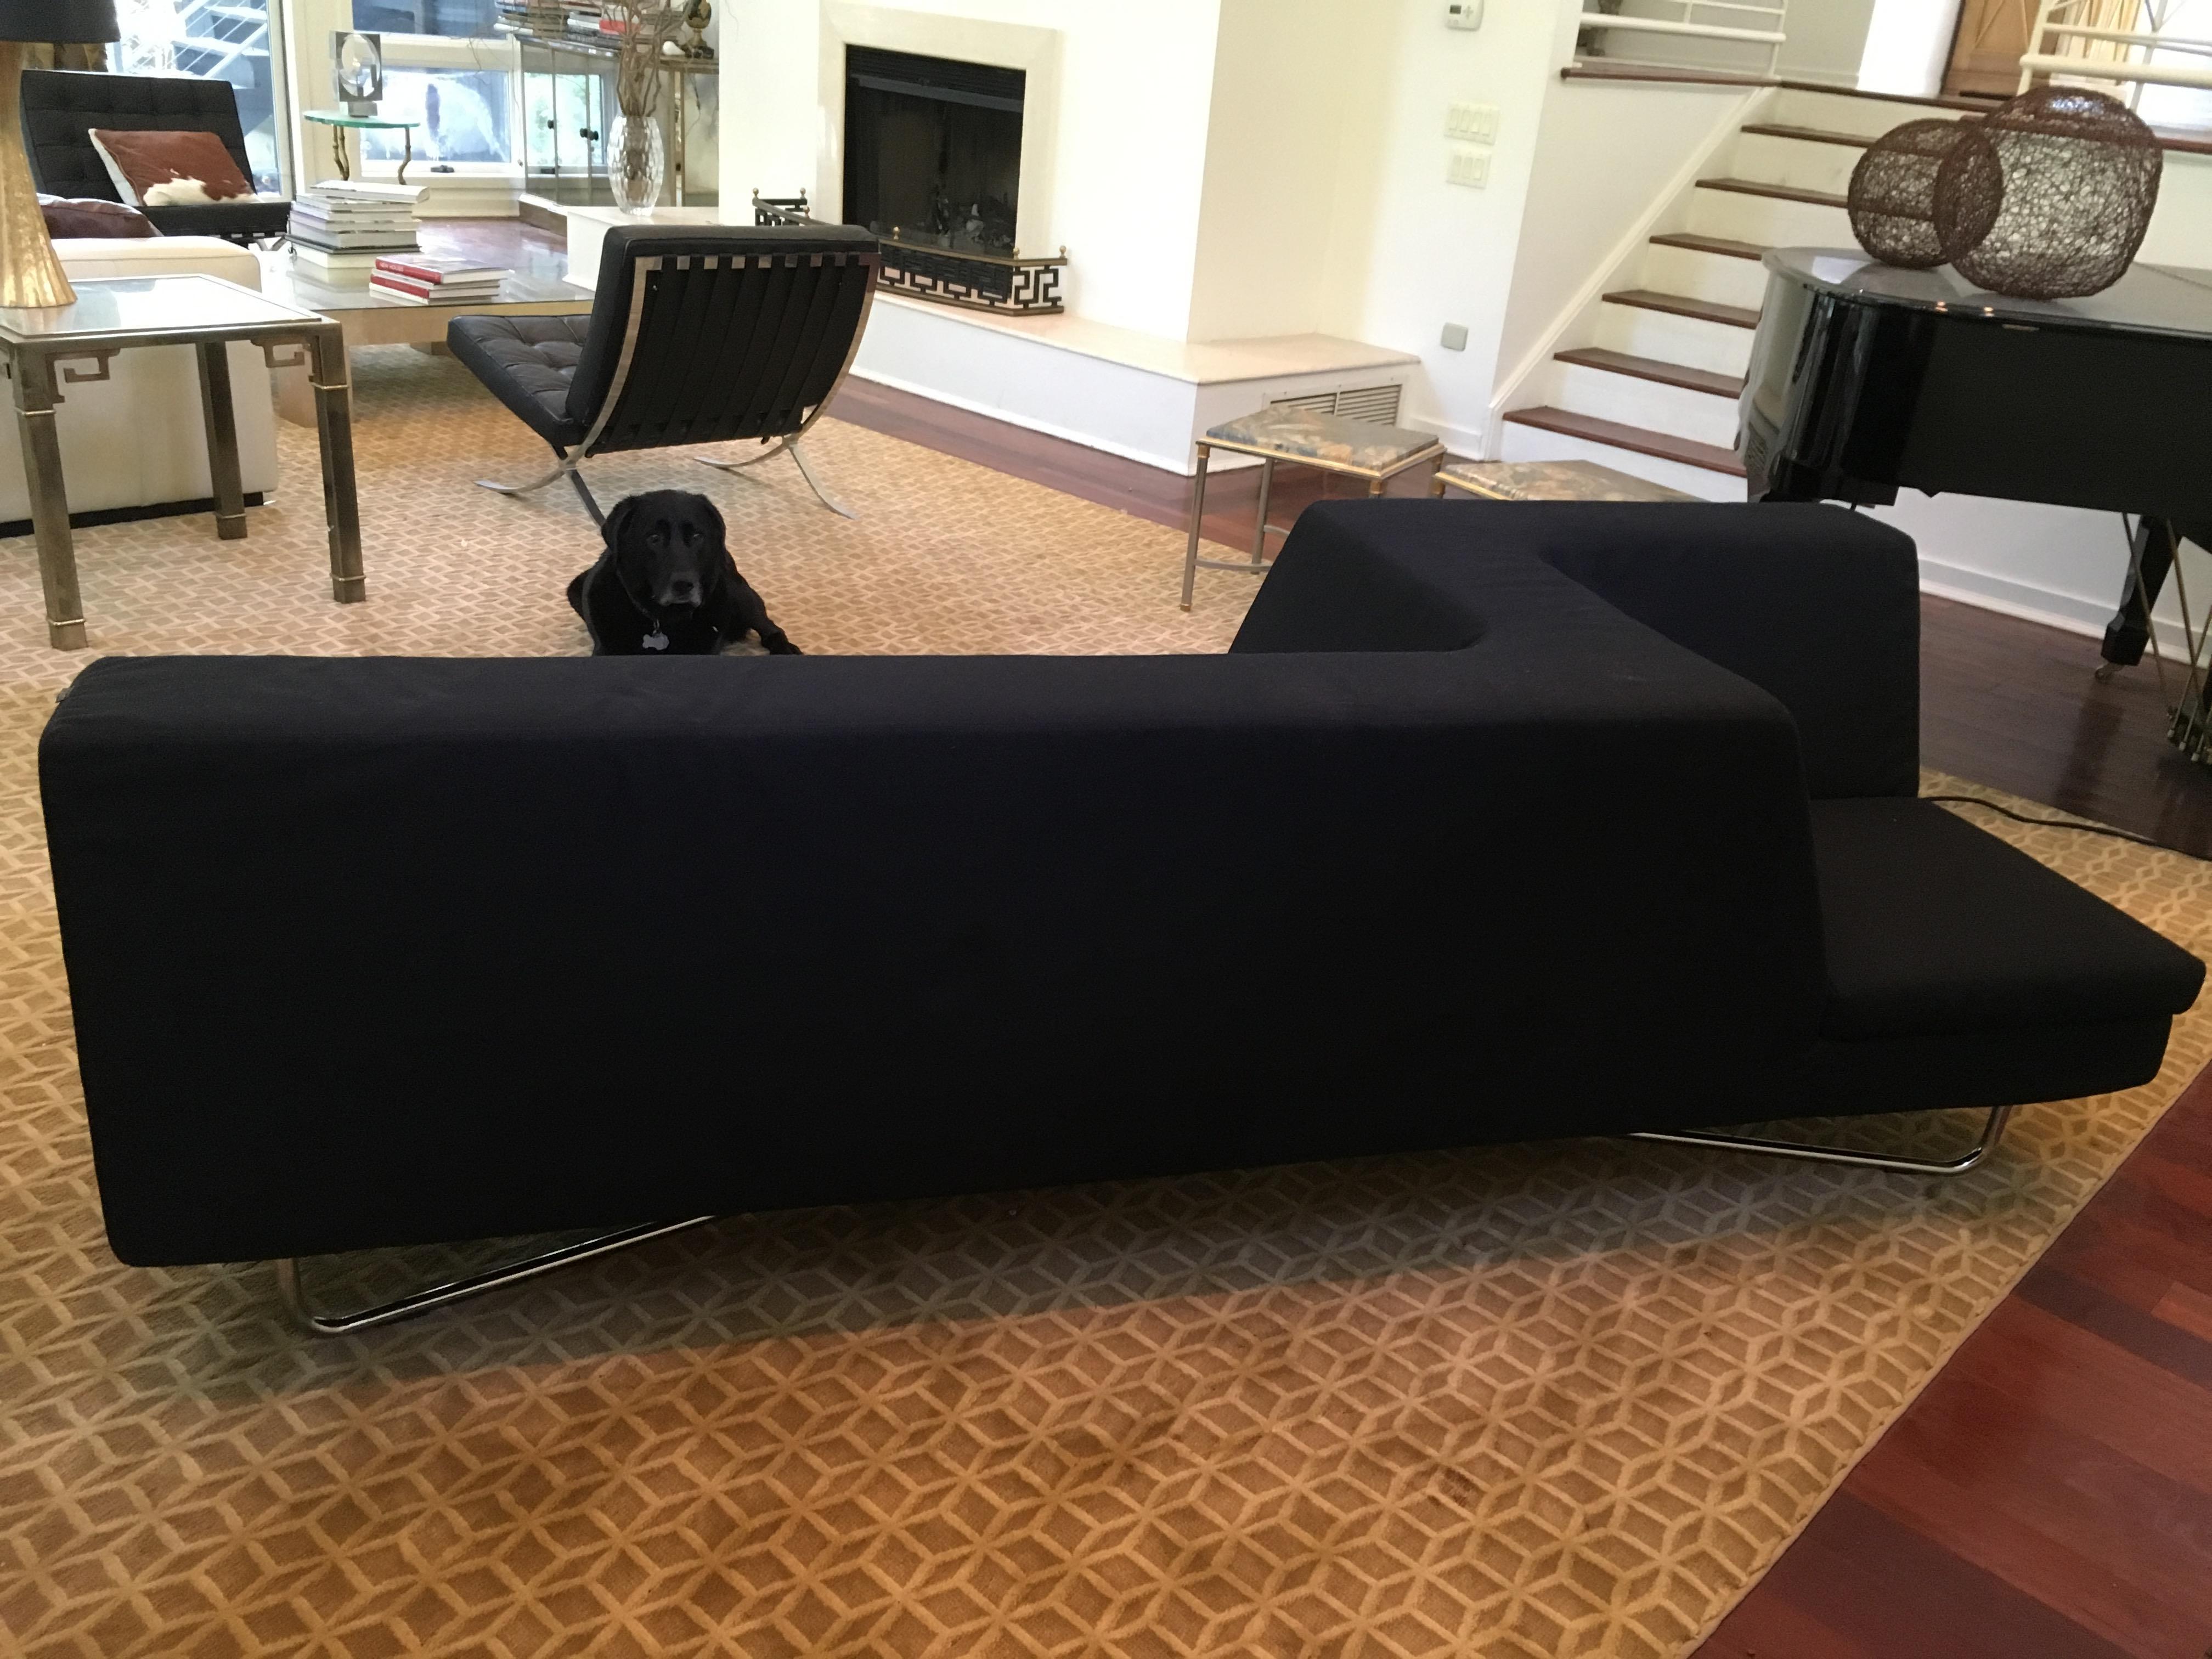 Frighetto Victory sofa by Cory Grosser. Black fabric, vice versa seating configuration. Chrome base. From a Greenwich, Connecticut mansion.